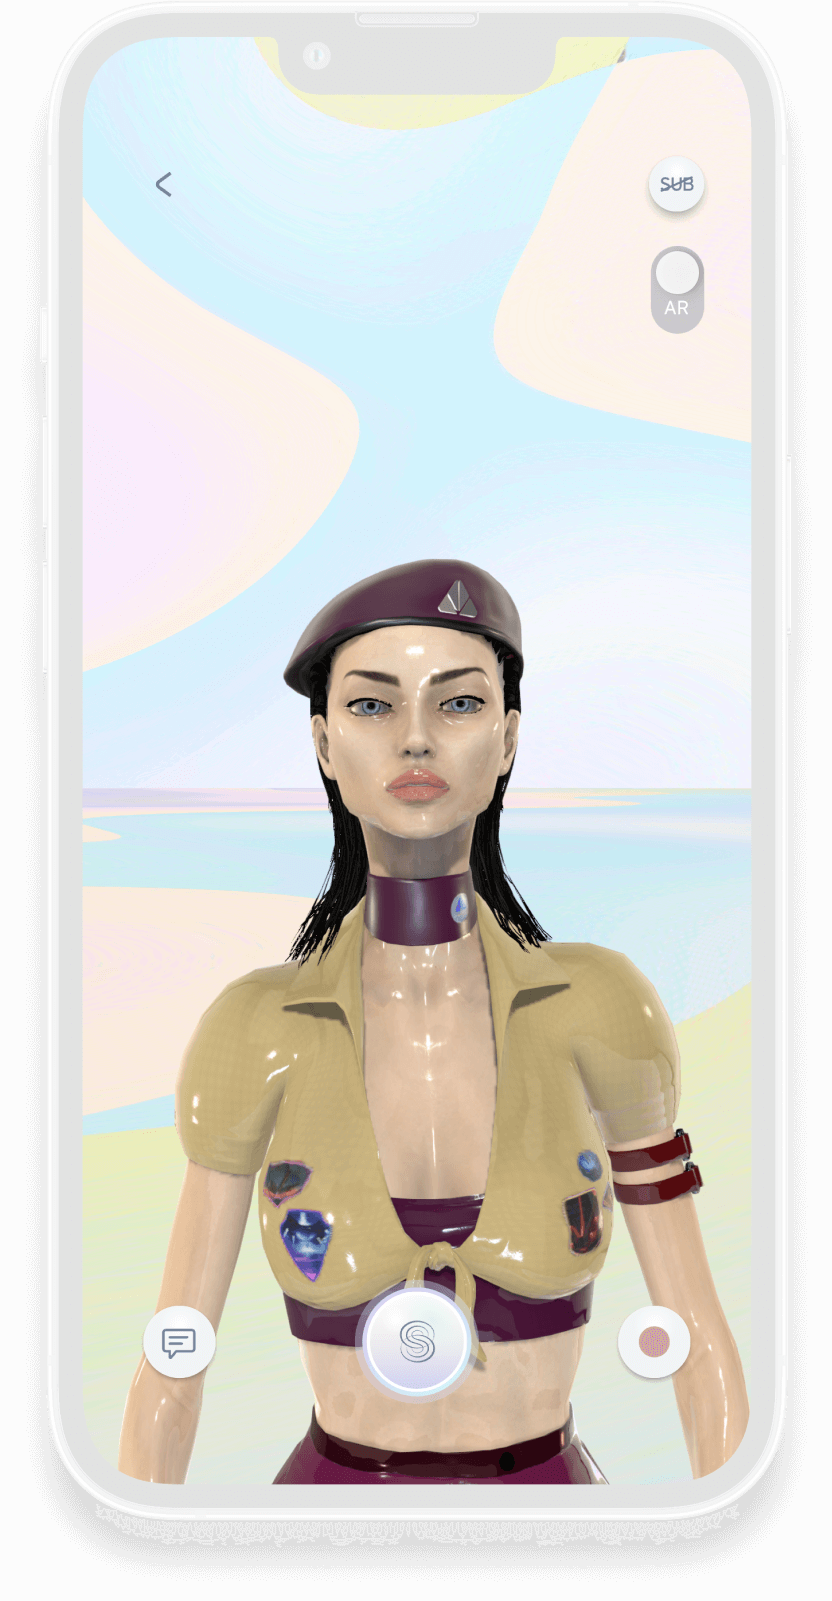 Phone screen with virtual character